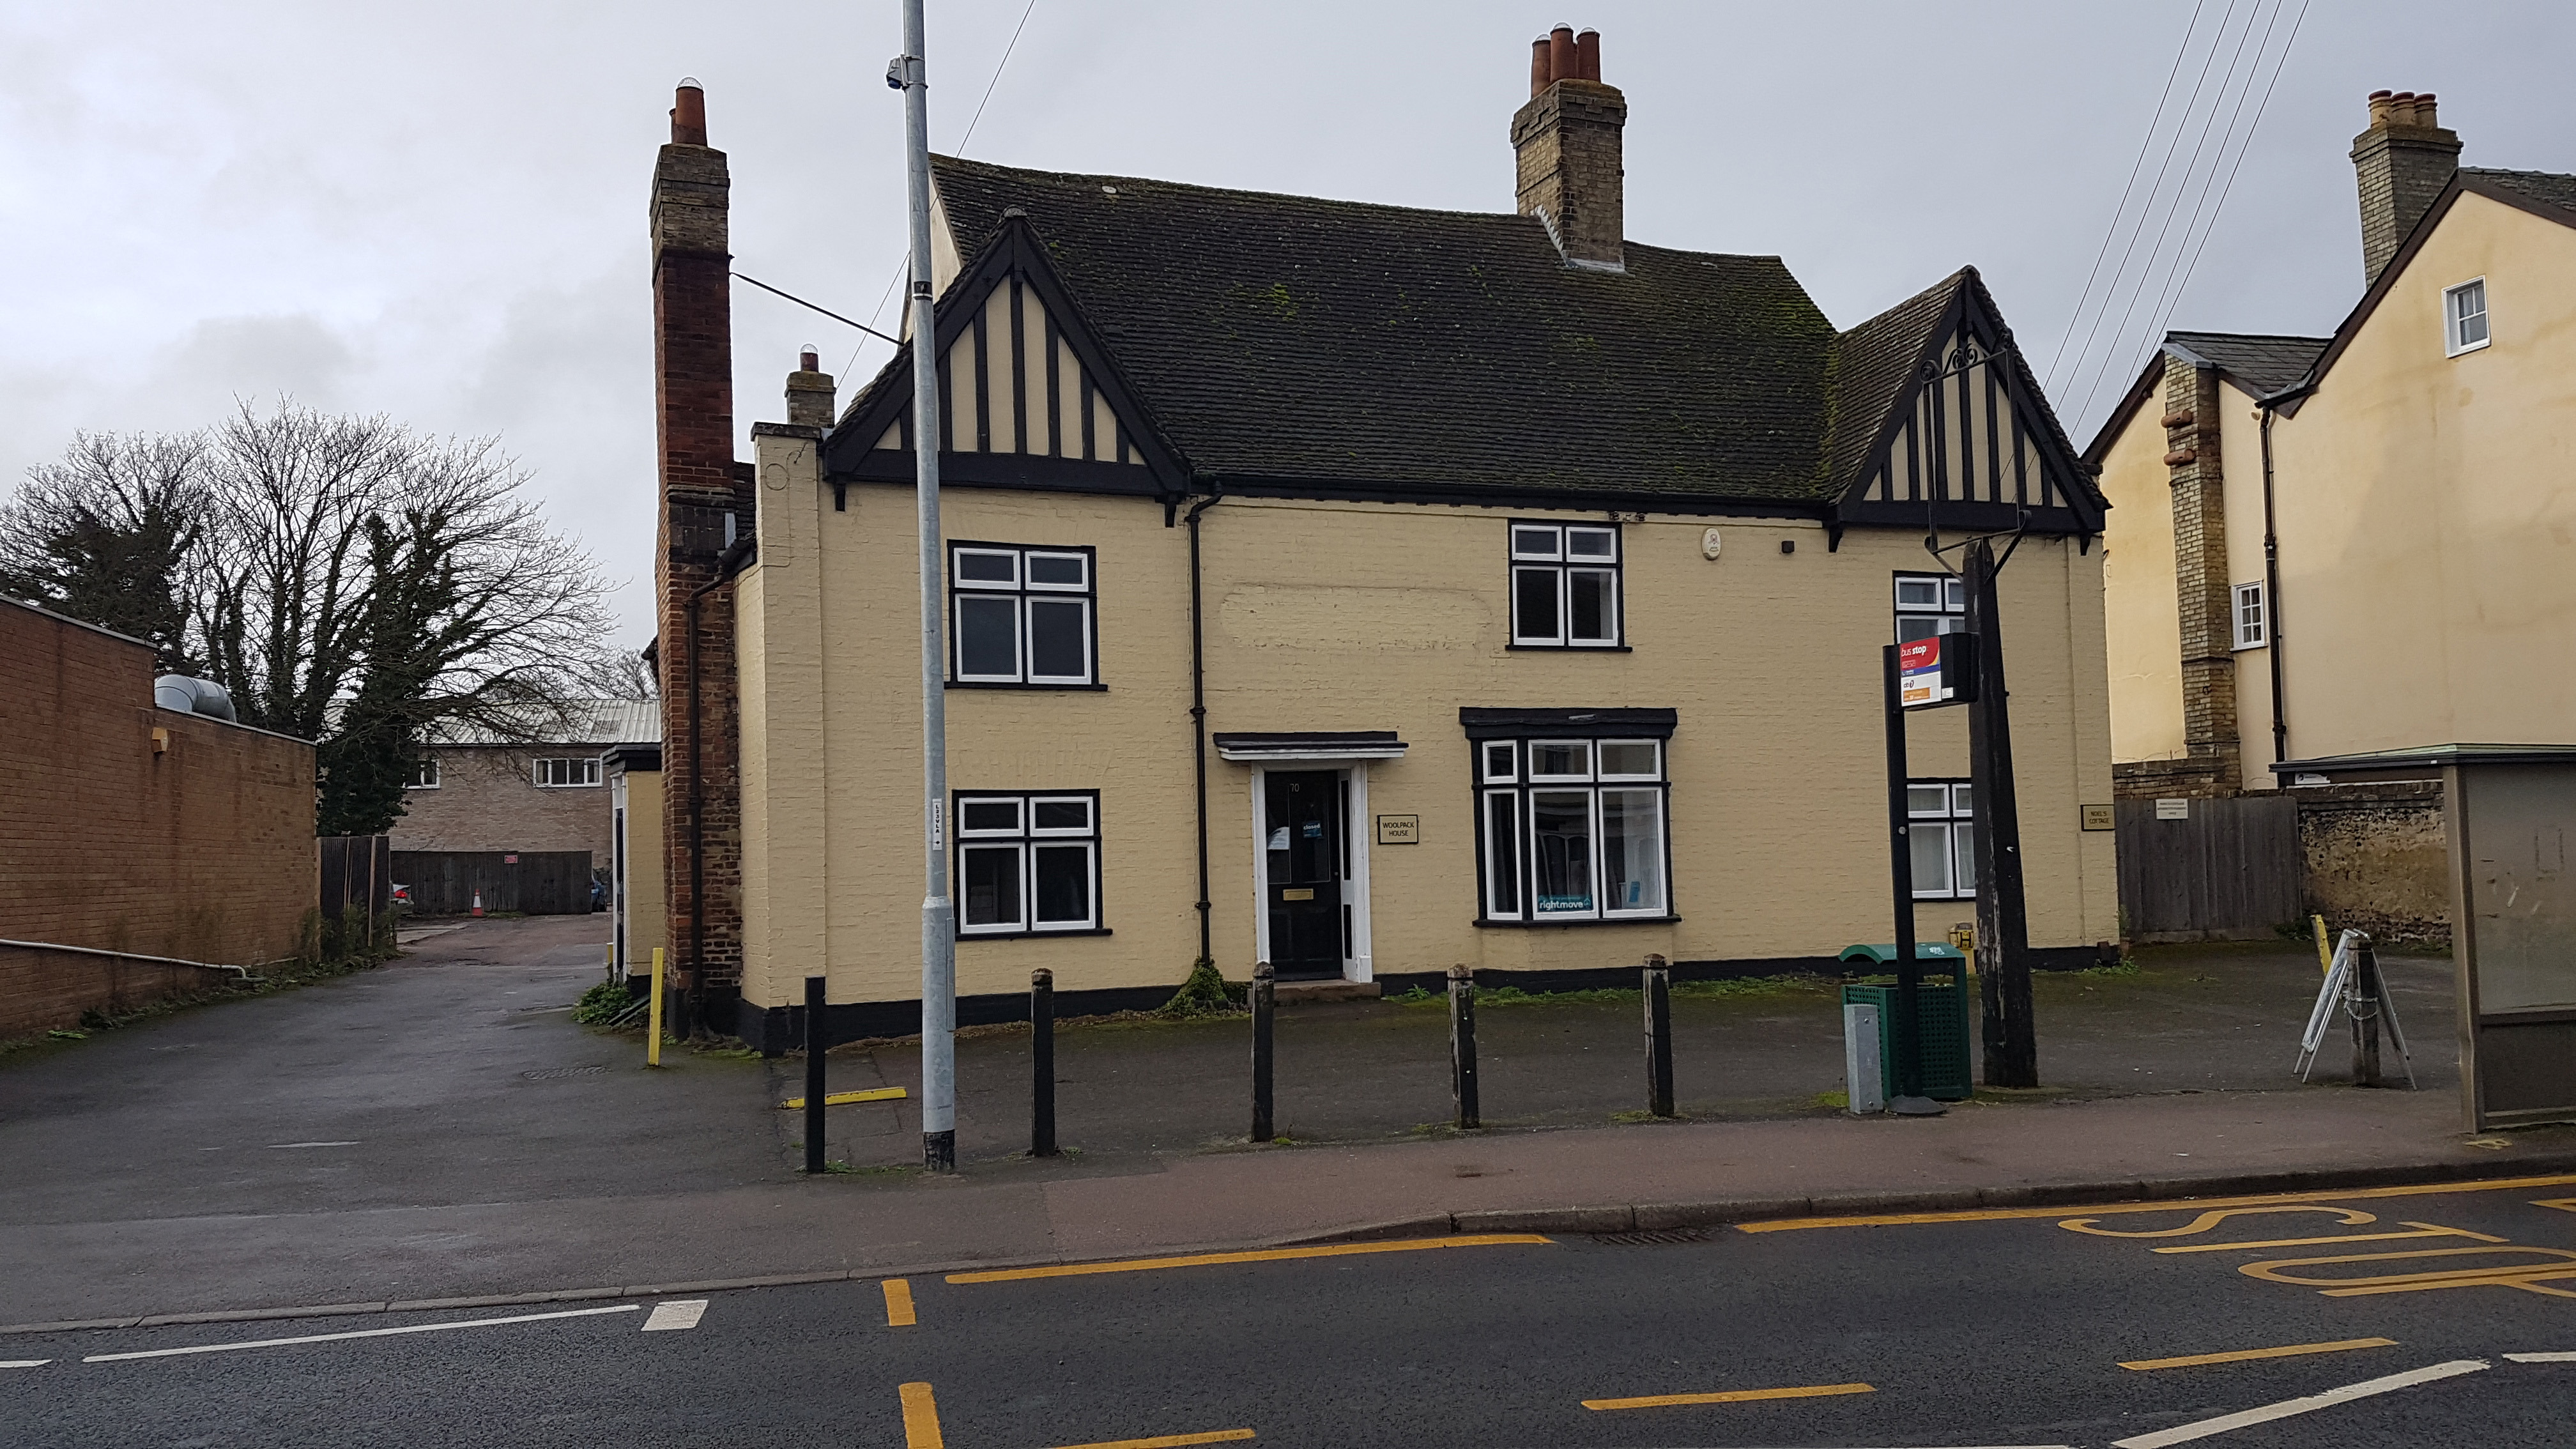 FORMER PERIOD PUB FOR RENT AS OFFICES